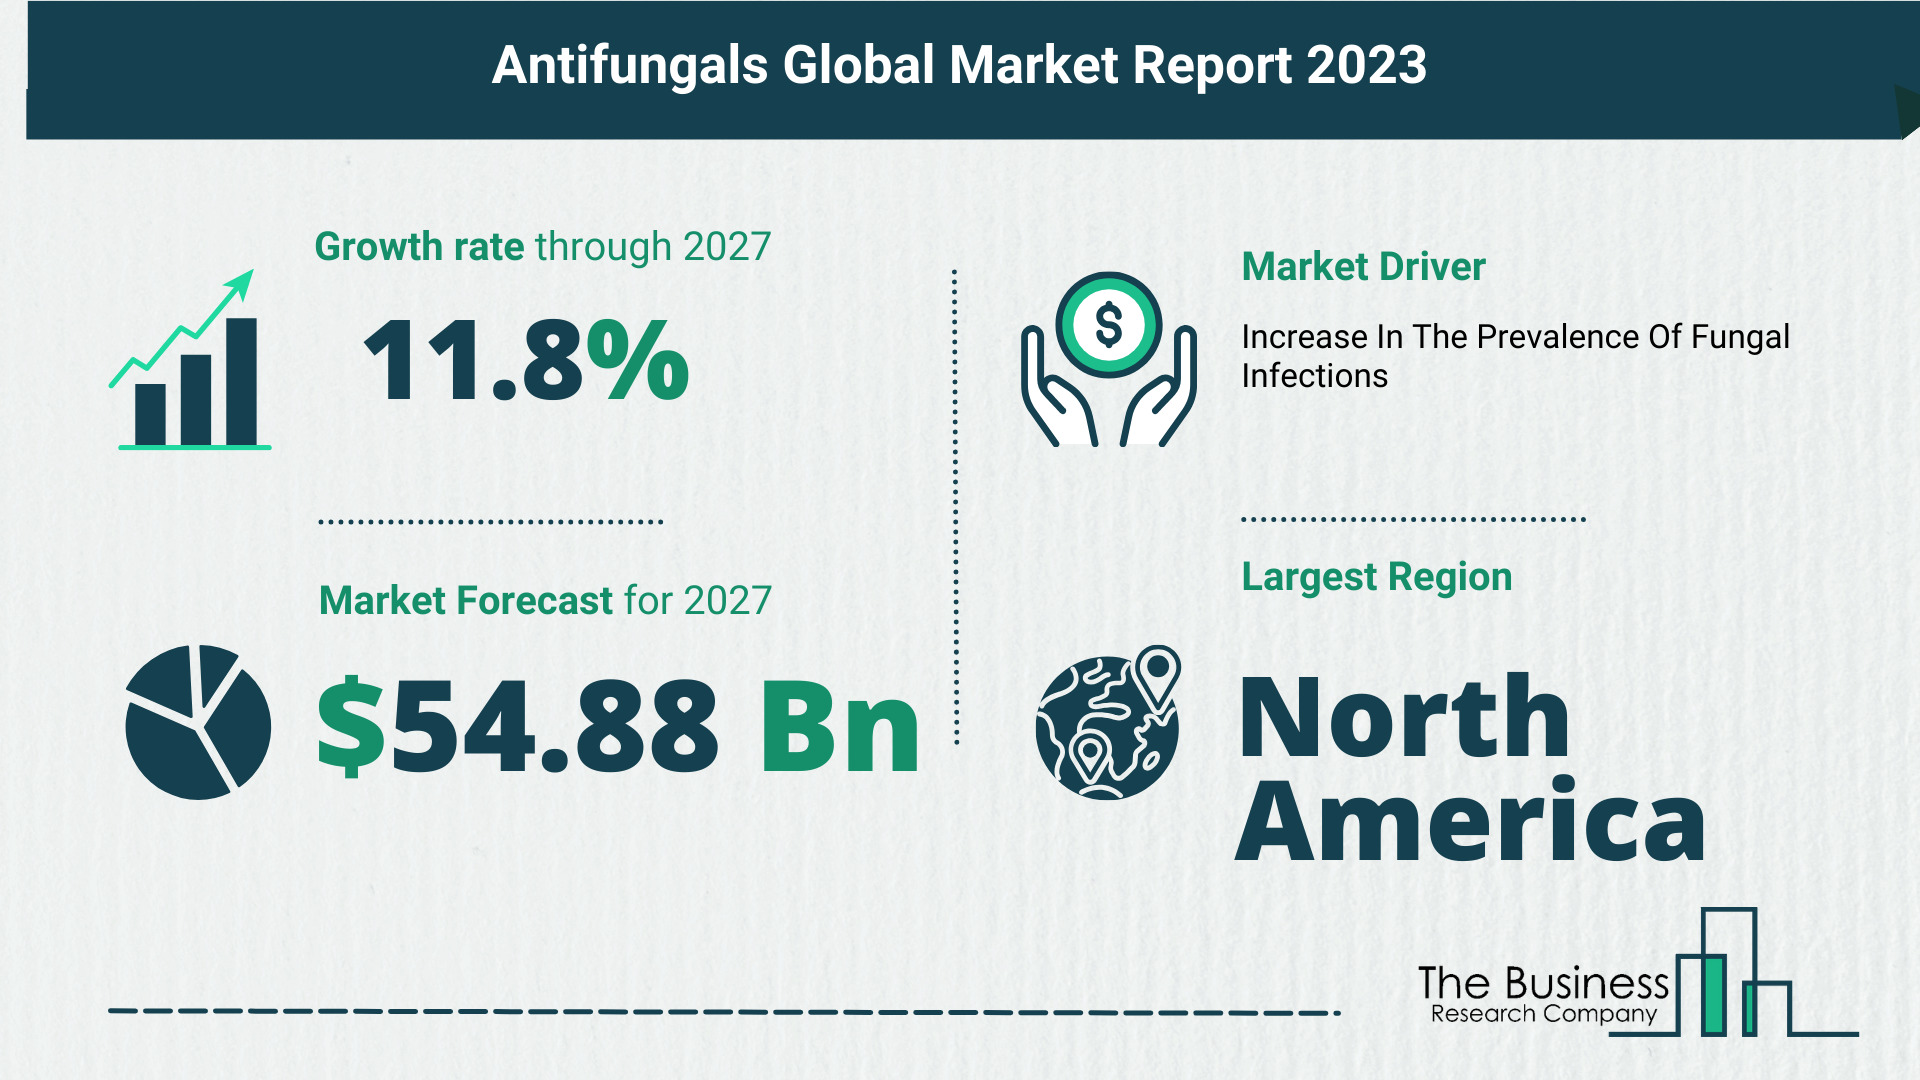 Top 5 Insights From The Antifungals Market Report 2023